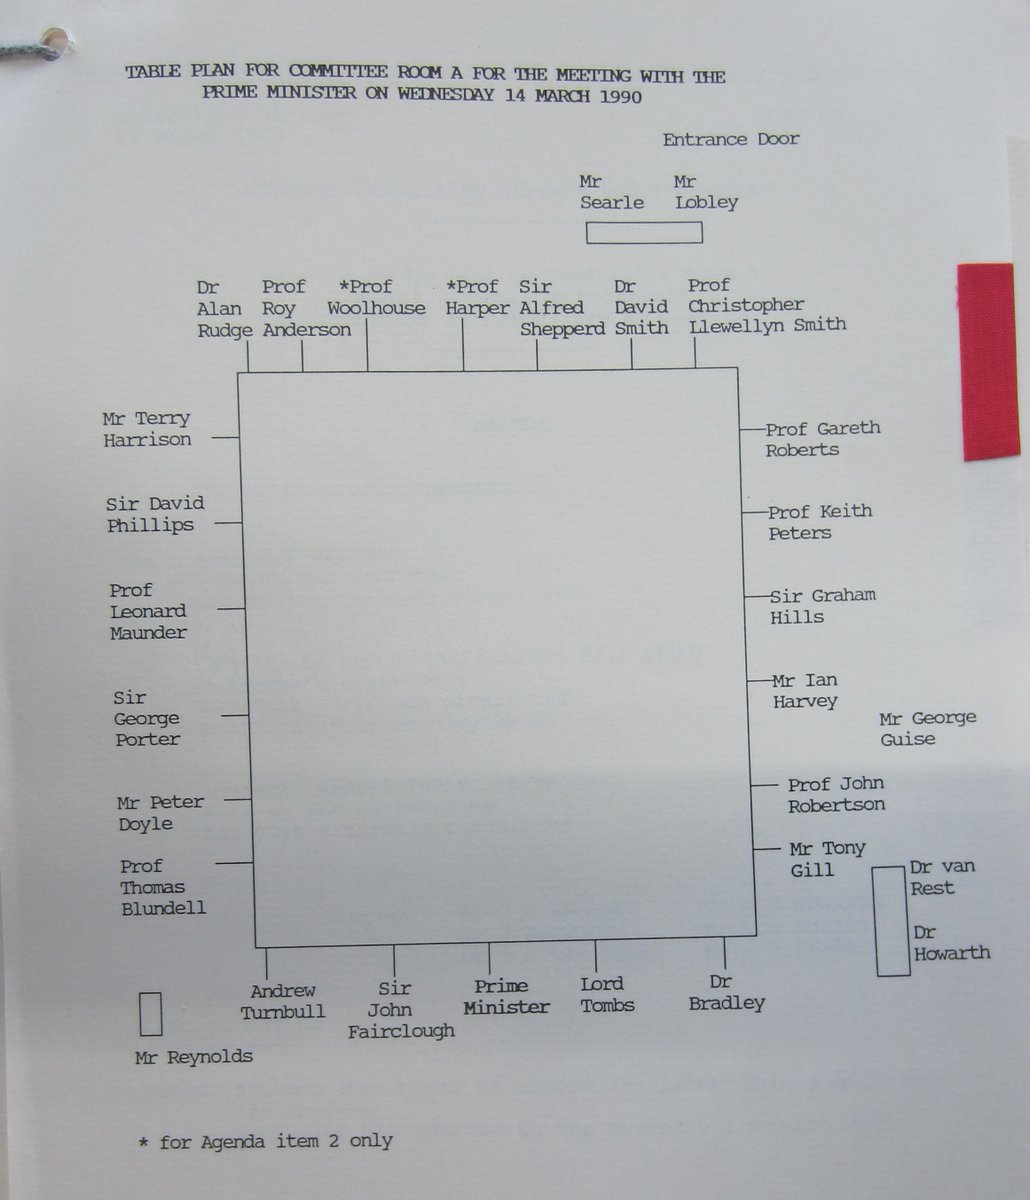 There is nothing new about politicians and their advisors mixing with the UK science advice system. Here's the table plan for the Advisory Council on Science and Technology, 14 March 1990. Chair: Margaret Thatcher, with George Guise, of No 10 Policy Unit, also in the room  https://twitter.com/Ian_Fraser/status/1253745995197943822